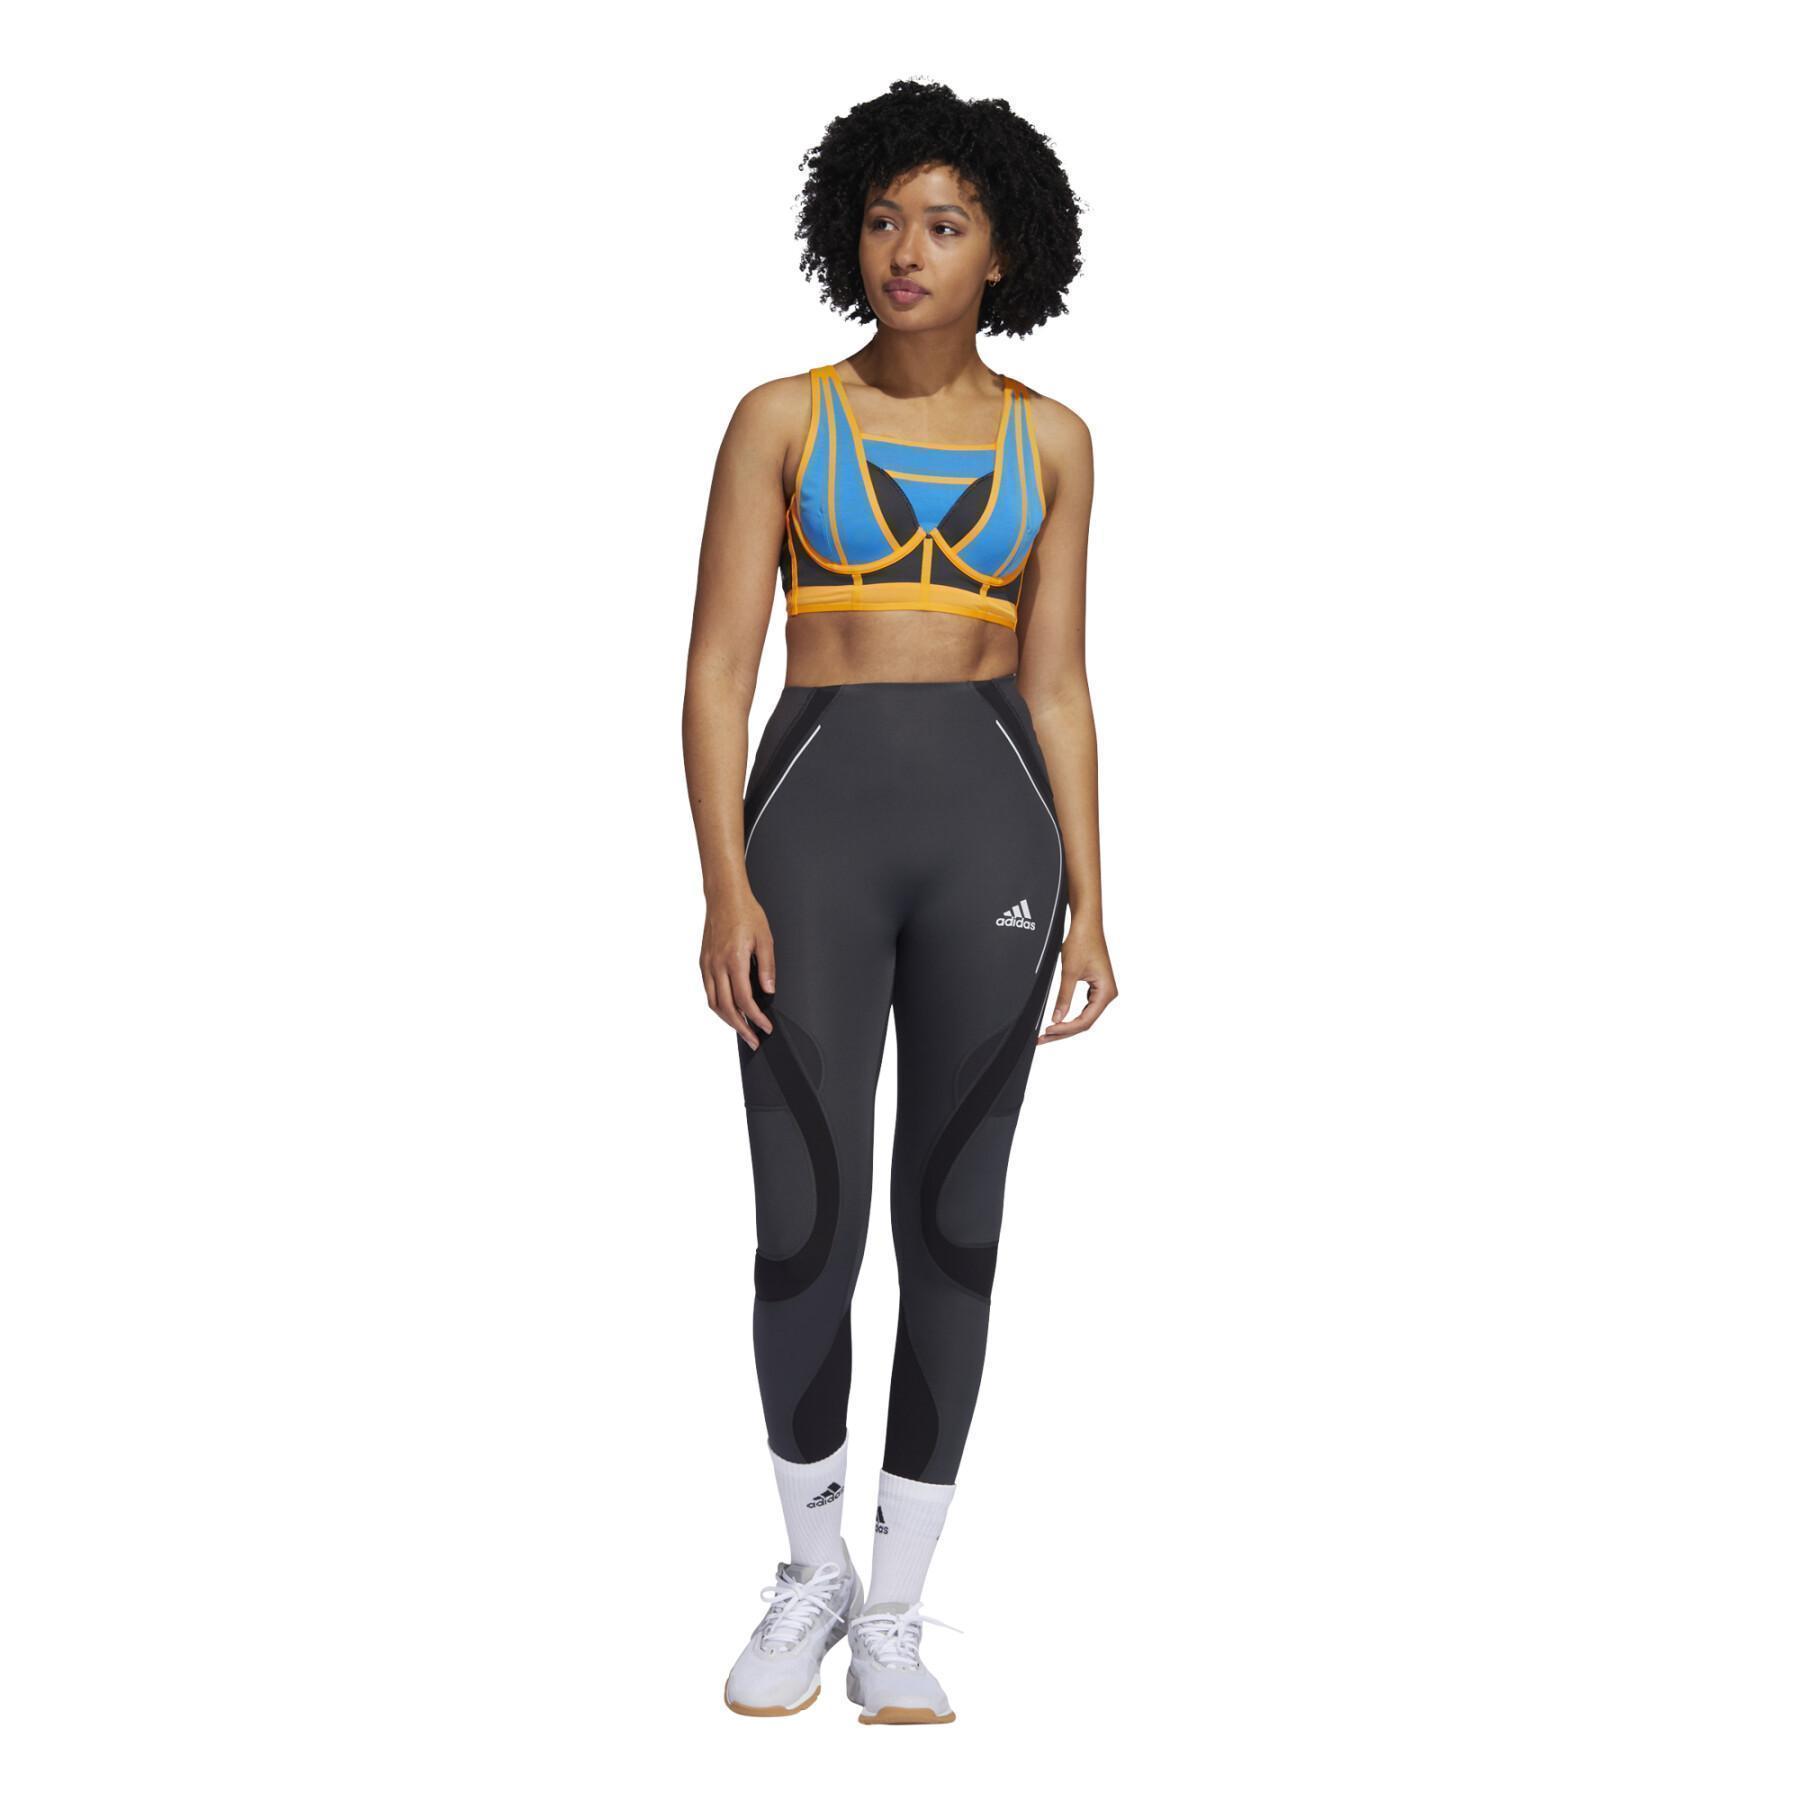 Women's bra adidas Tlrd Impact Luxe Training High-Support